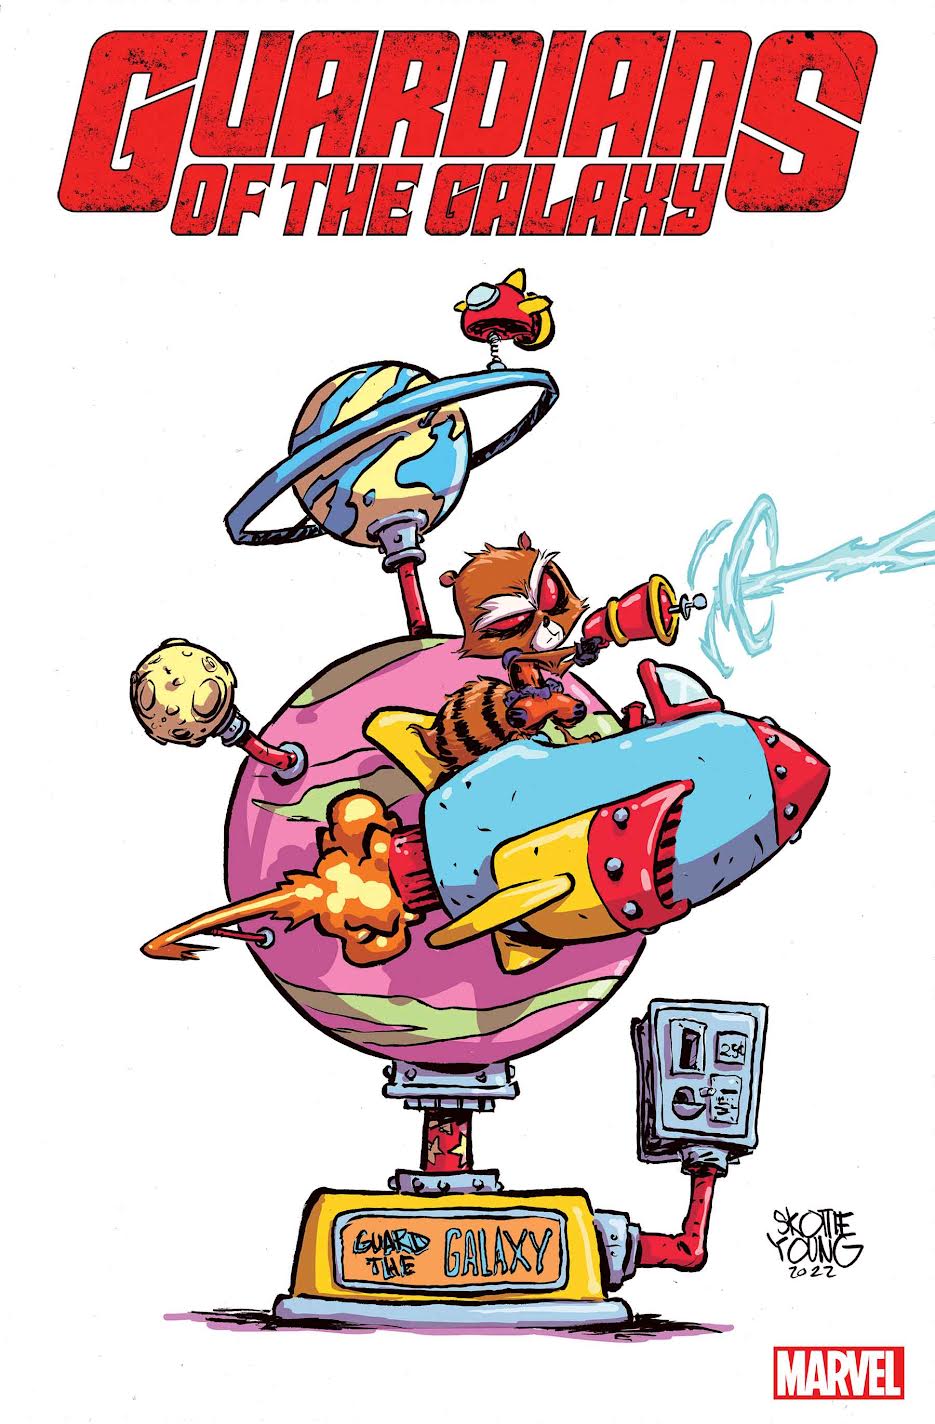 a cartoonish Rocket Racoon rides in a child's rocket ride